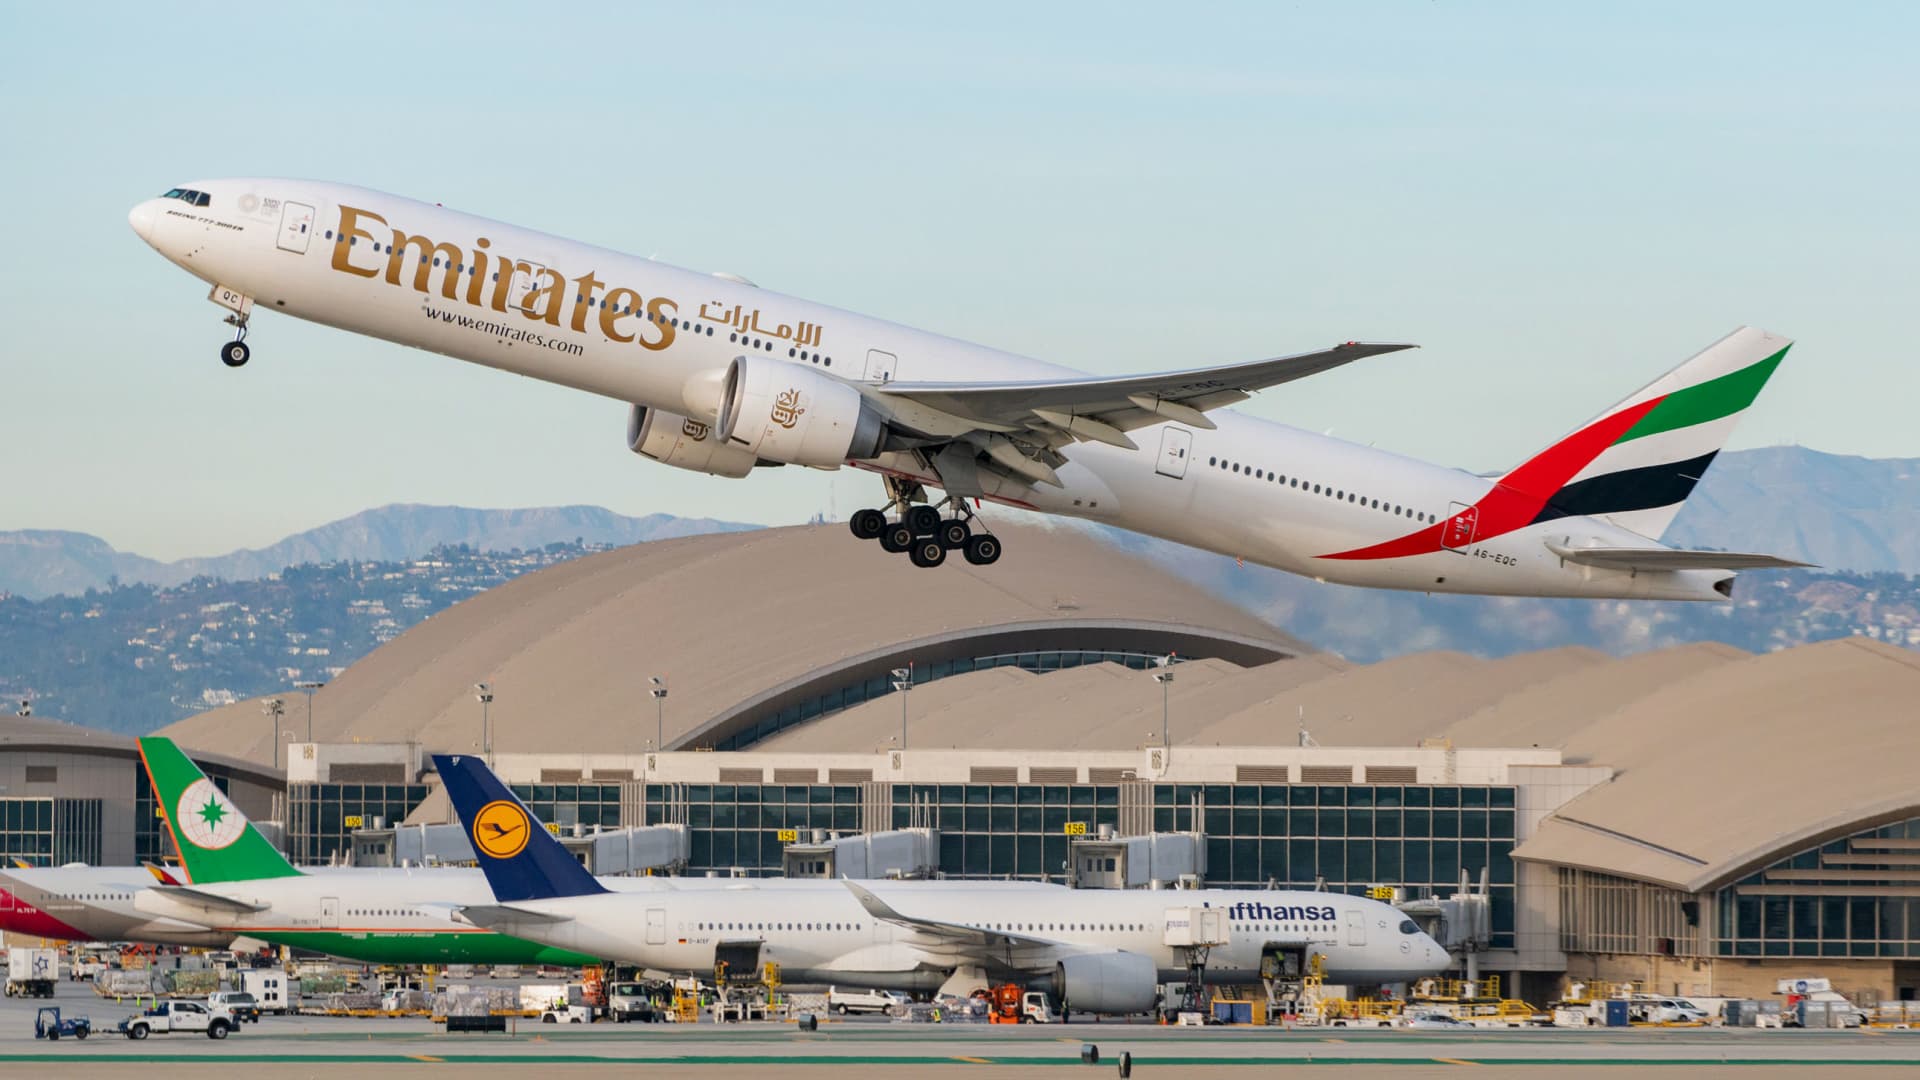 Emirates' chairman has a message for Boeing: 'Get your act together'